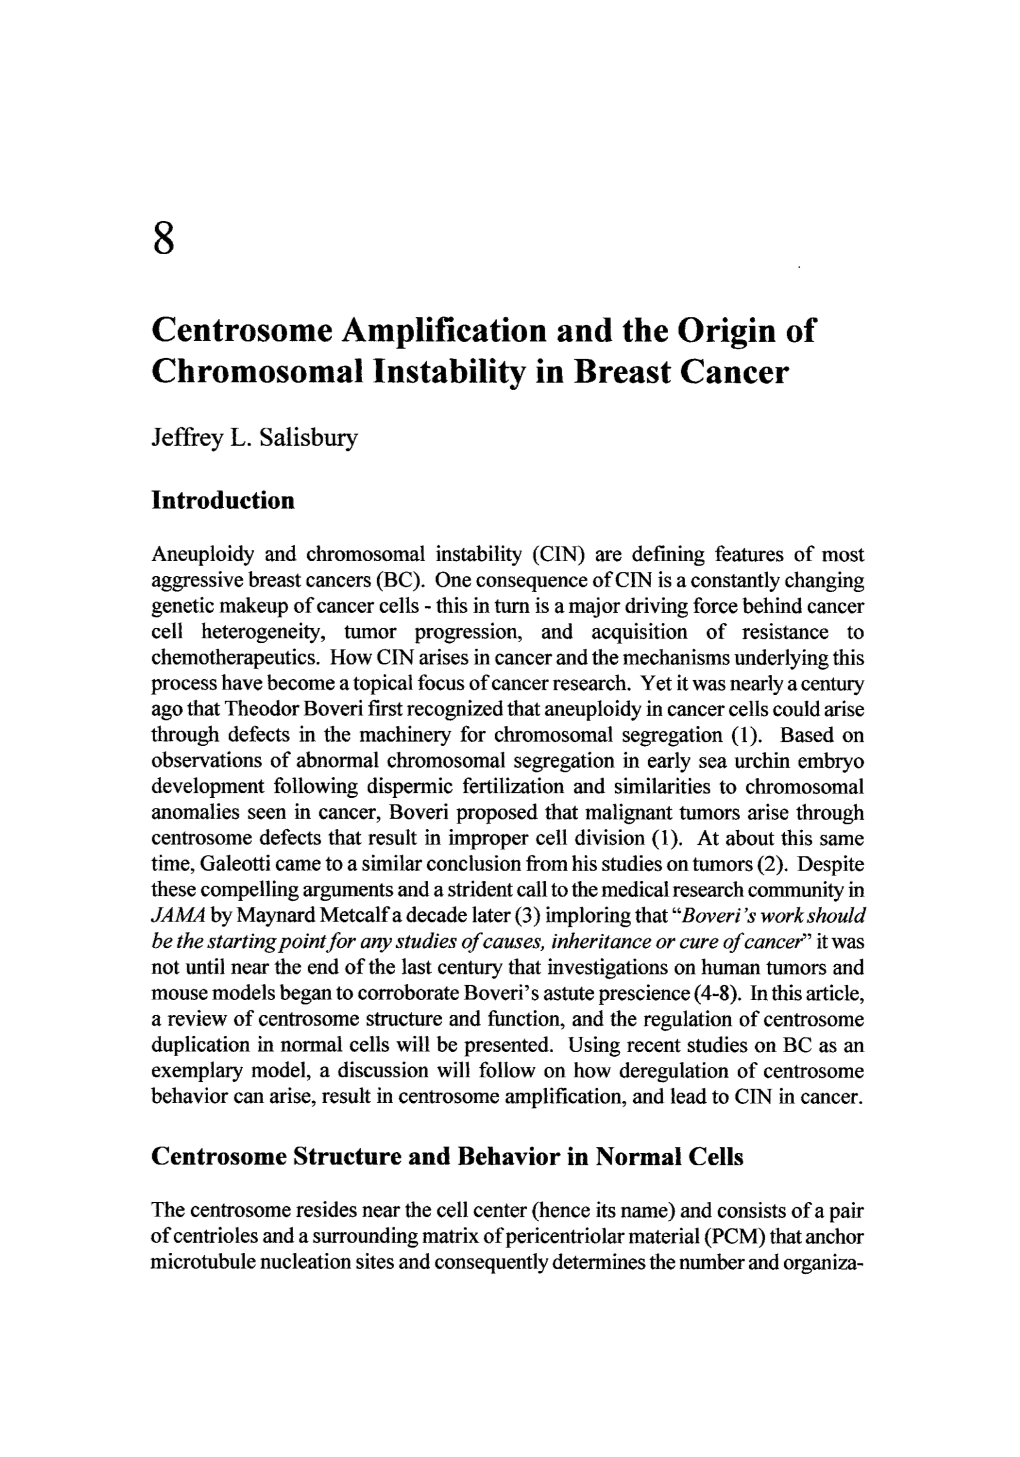 Centrosome Amplification and the Origin of Chromosomal Instability in Breast Cancer